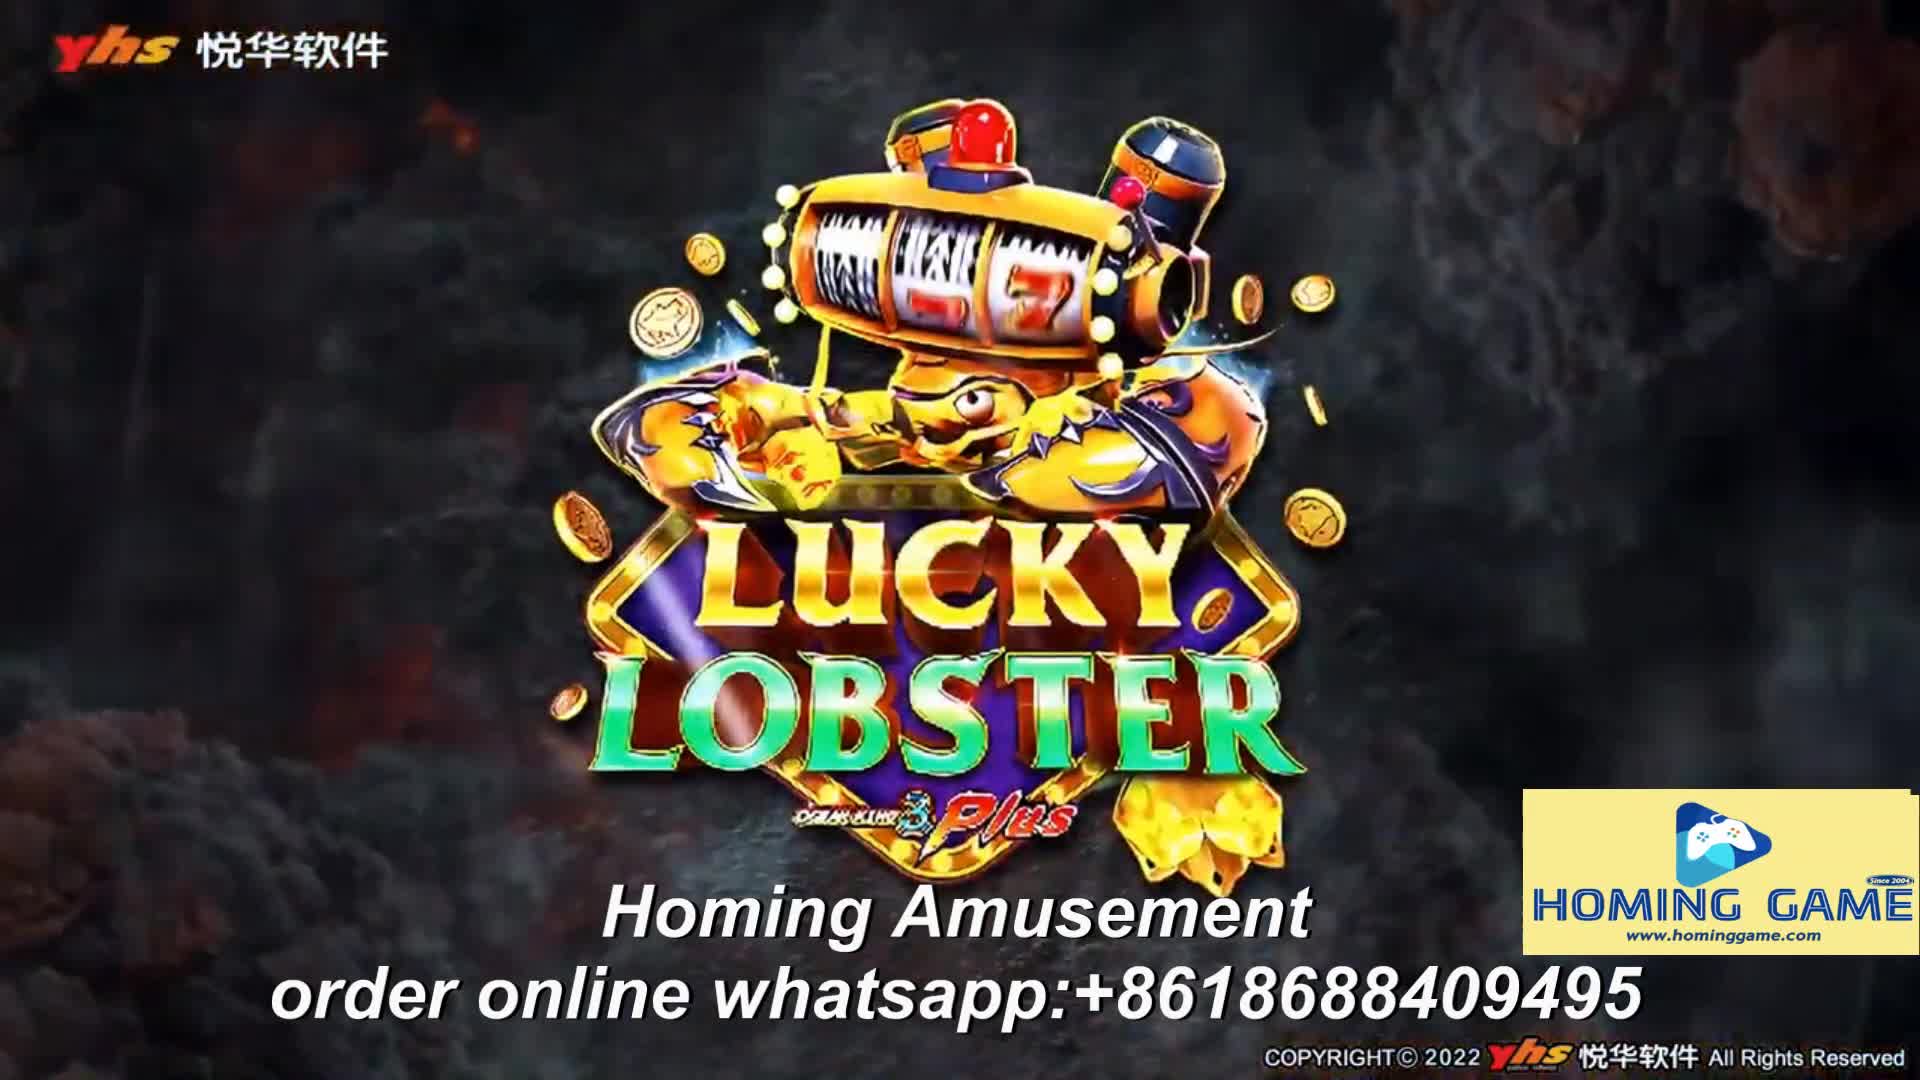 US IGS Ocean King 3 Plus Lucky Lobster Fishing Game Machine by Homing Amusement#igsfishinggame#igs